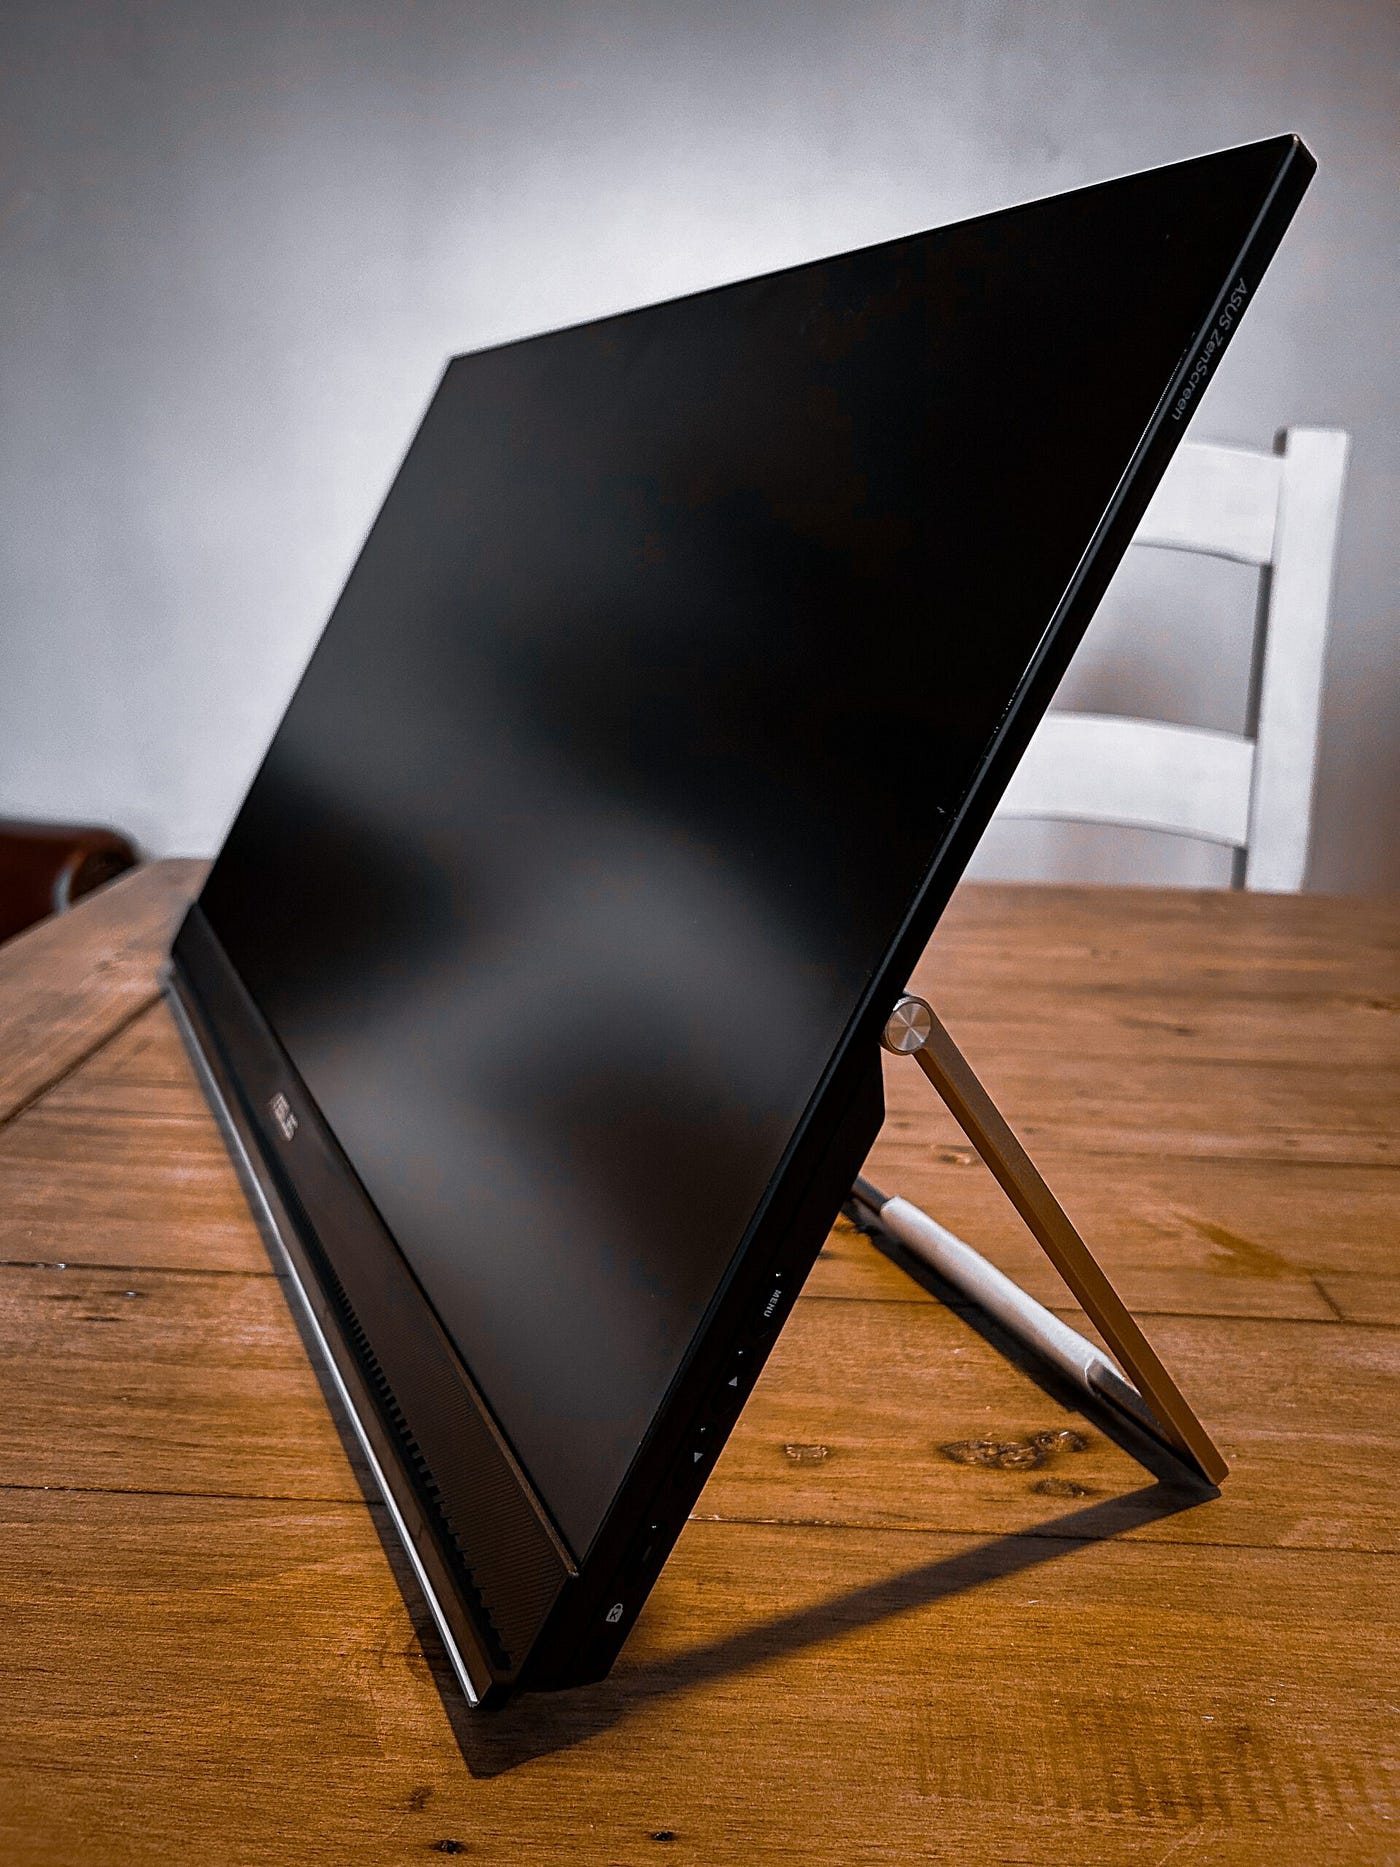 ASUS Zenscreen MB249C Portable Monitor Review, by Jessica Bryson, TechLife